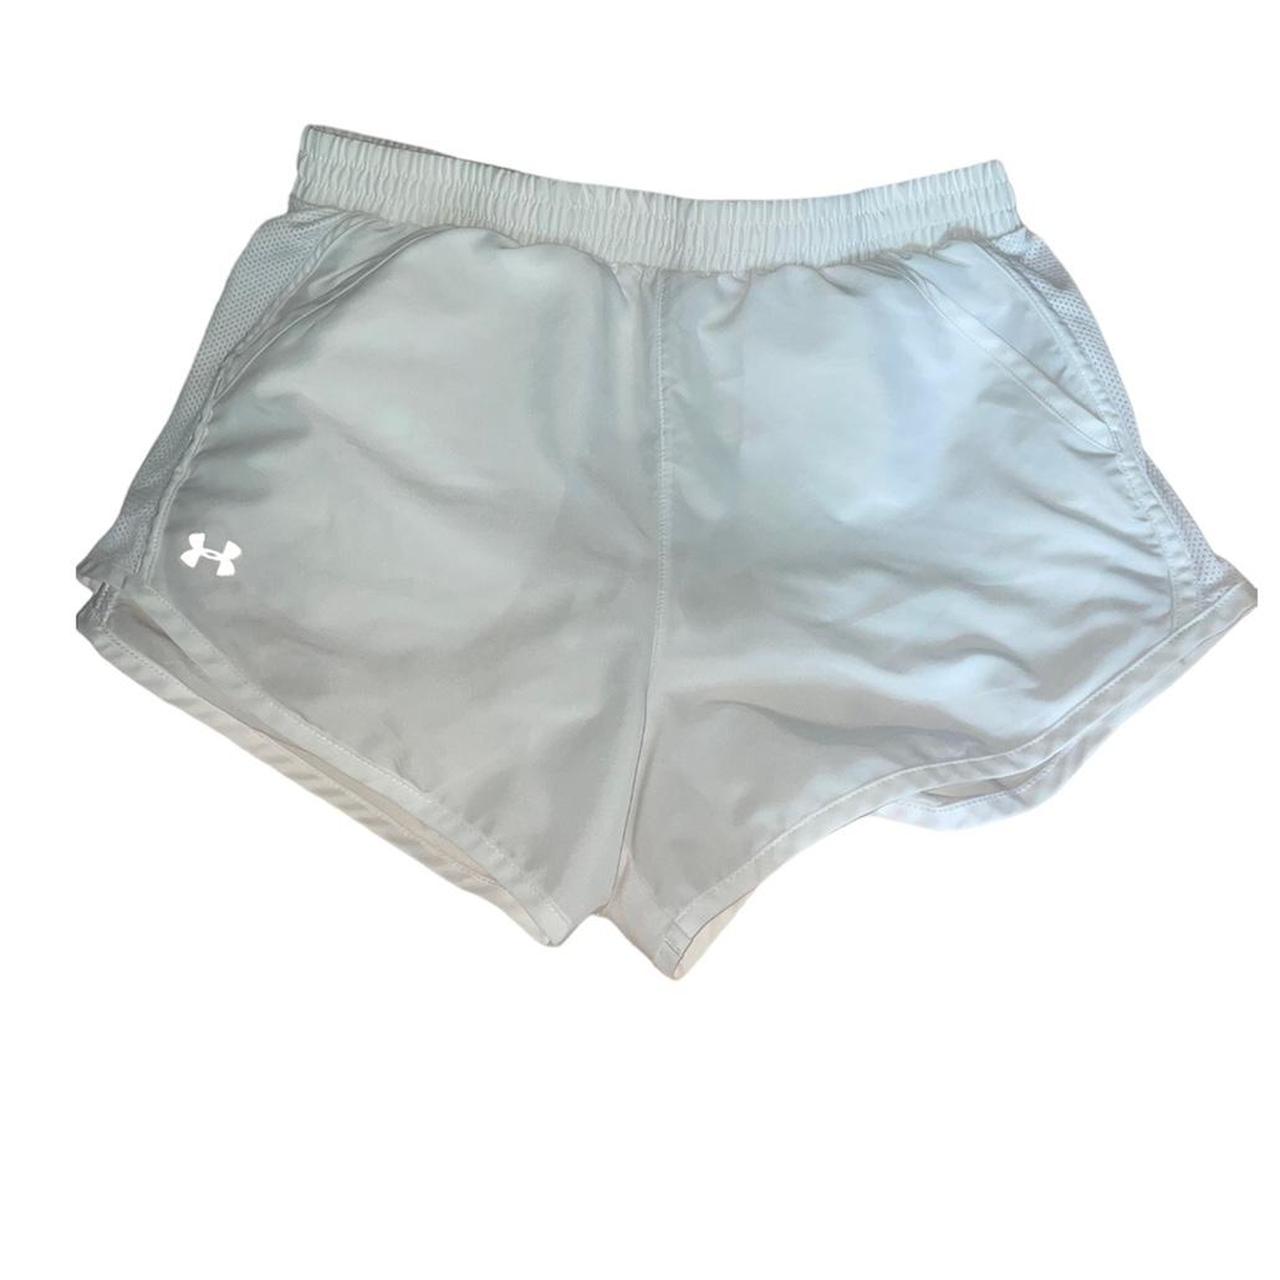 Under Armour, Shorts, Womens Under Armor Mini Shorts Size S